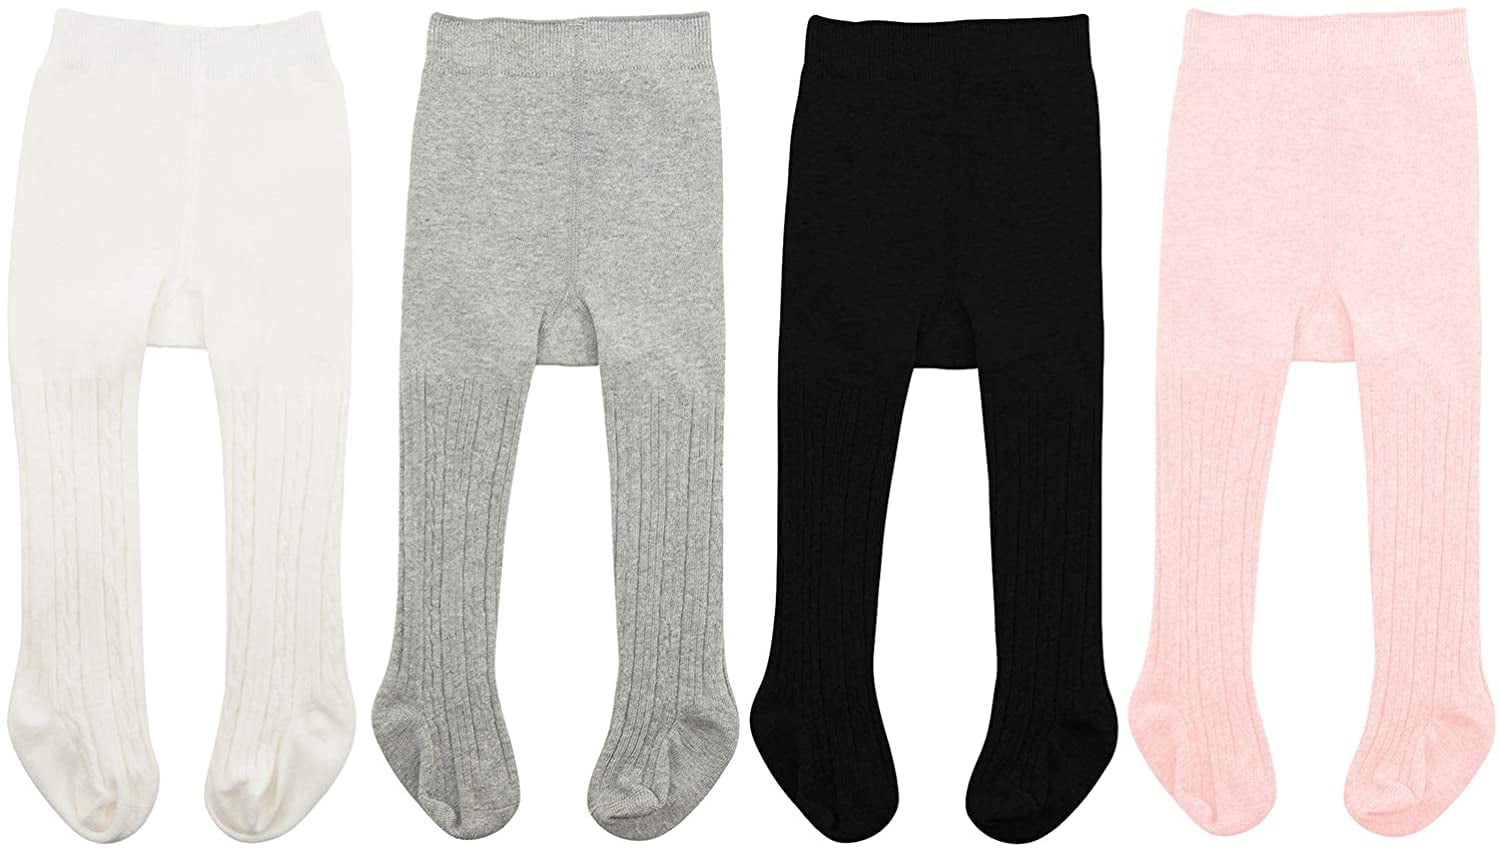 4 Pack Baby Toddler Girls Cotton Cable Knit Tights Pantyhose Bow-knot Leggings Stocking Pants